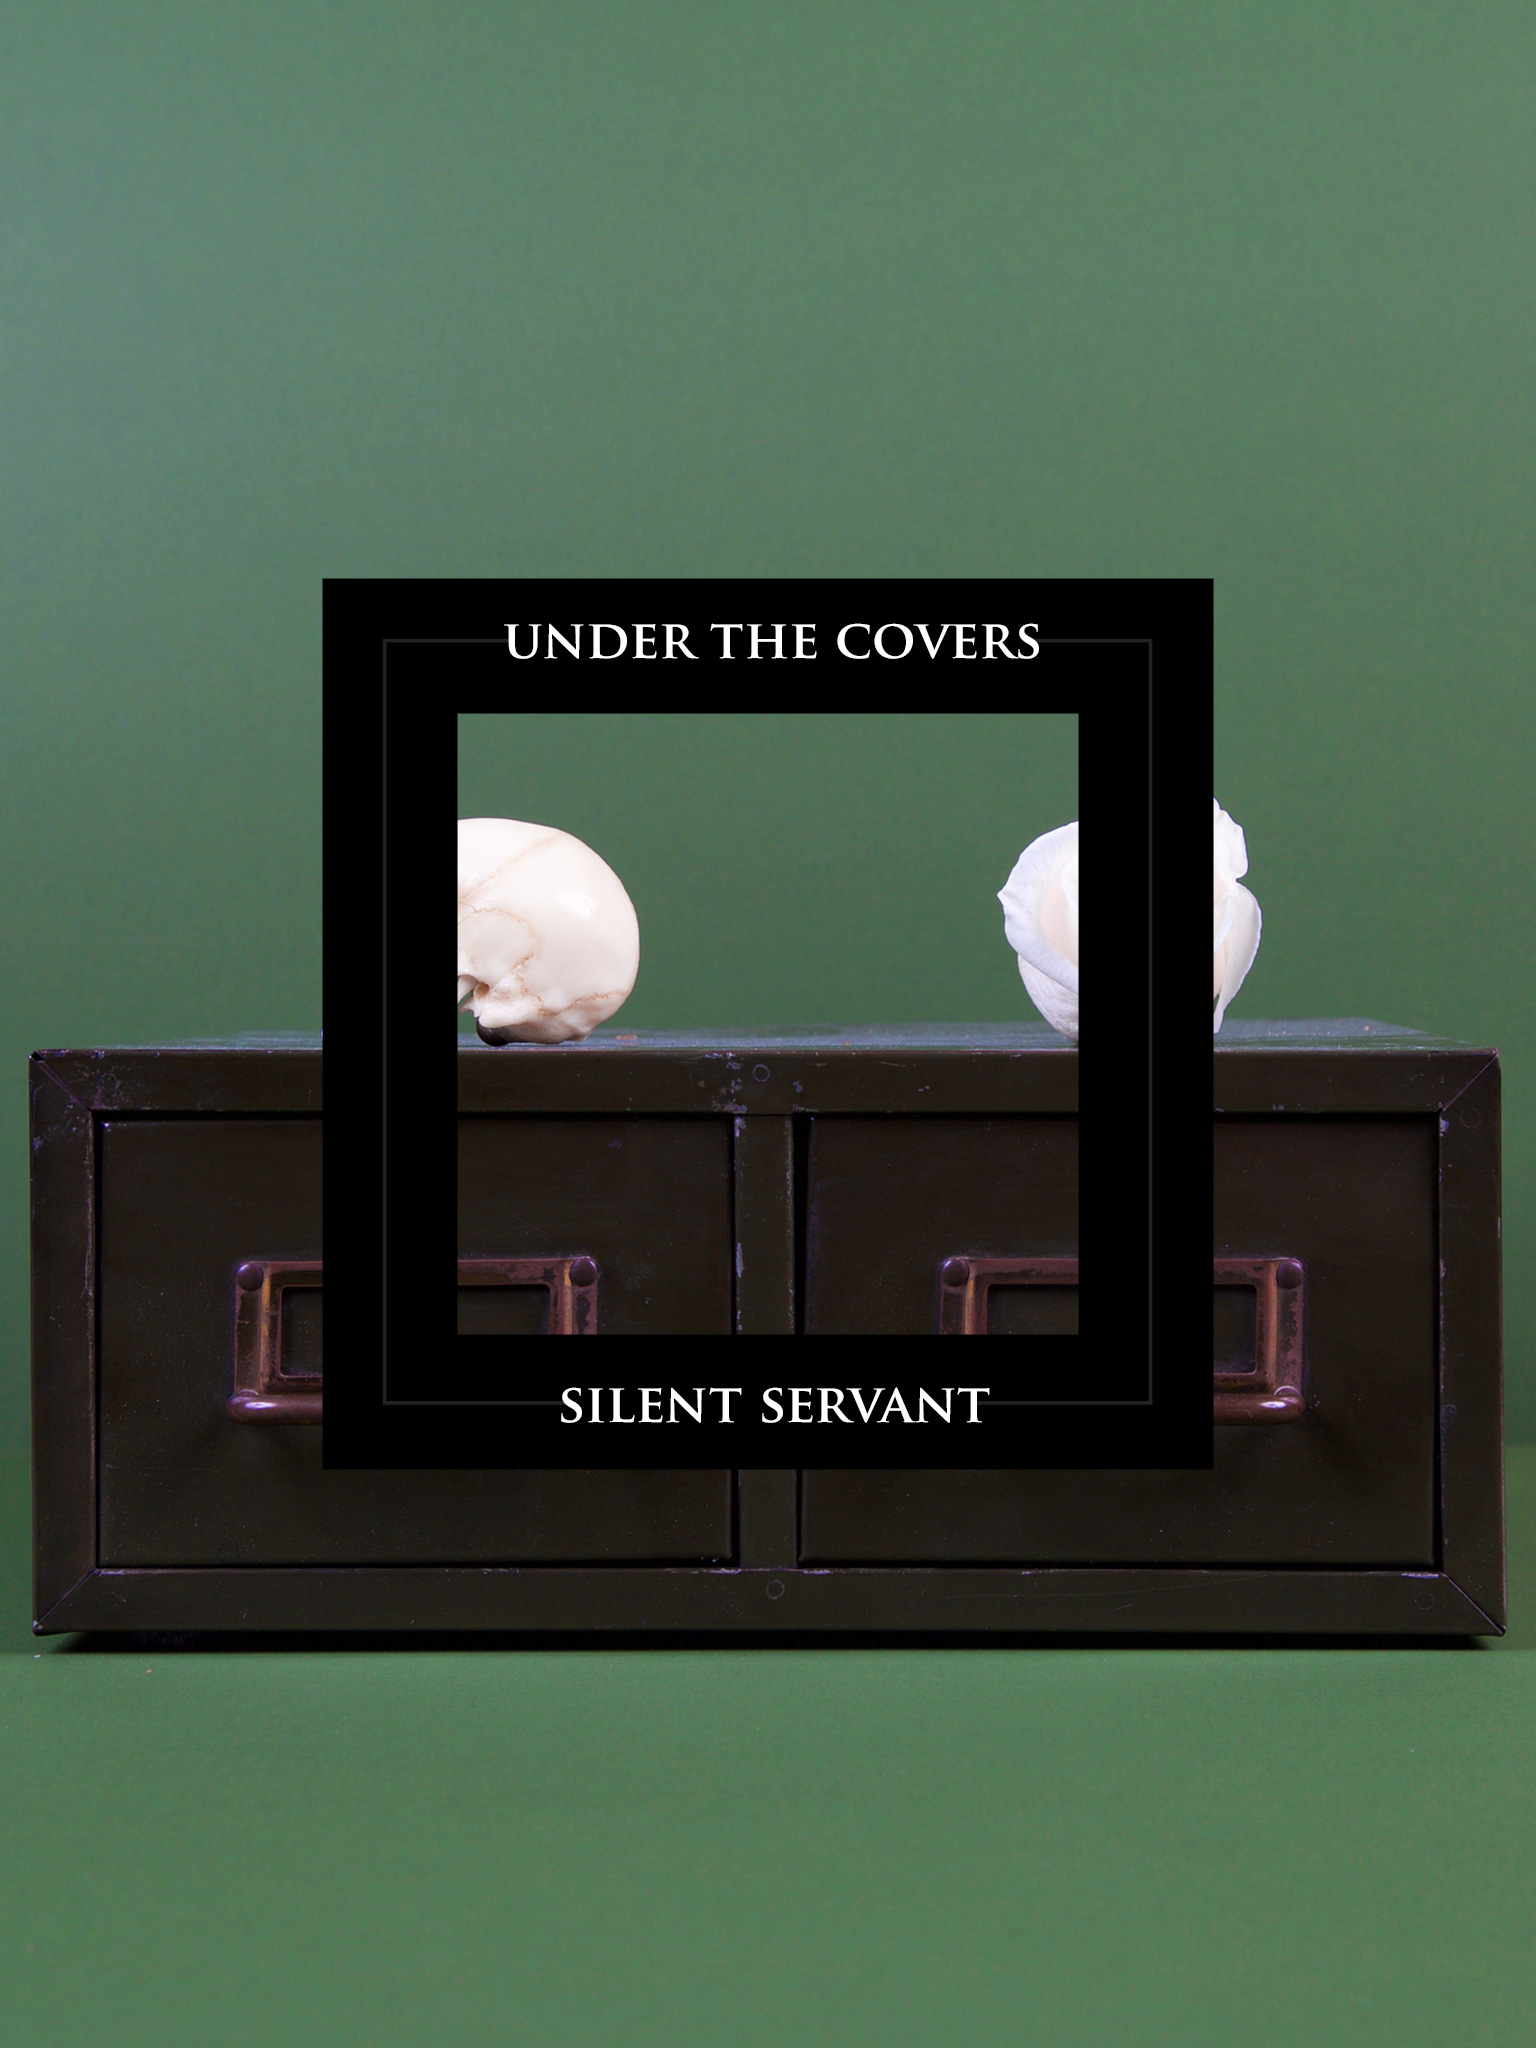 Under the covers: Silent Servant